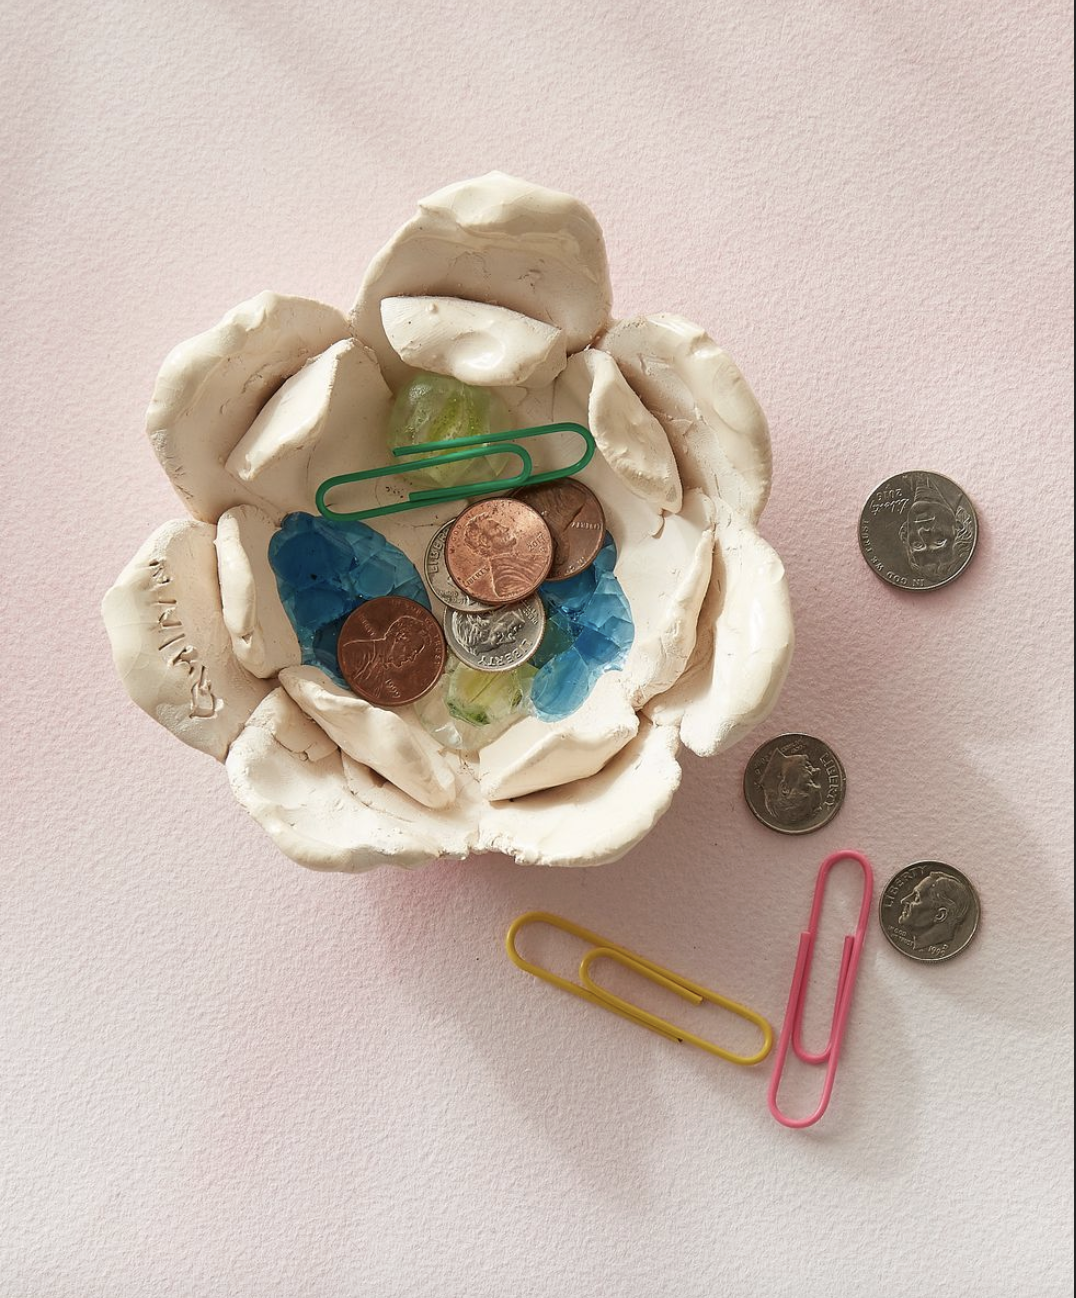 a small bowl made from oven bake clay filled with pennie and paperclips on a pink surface